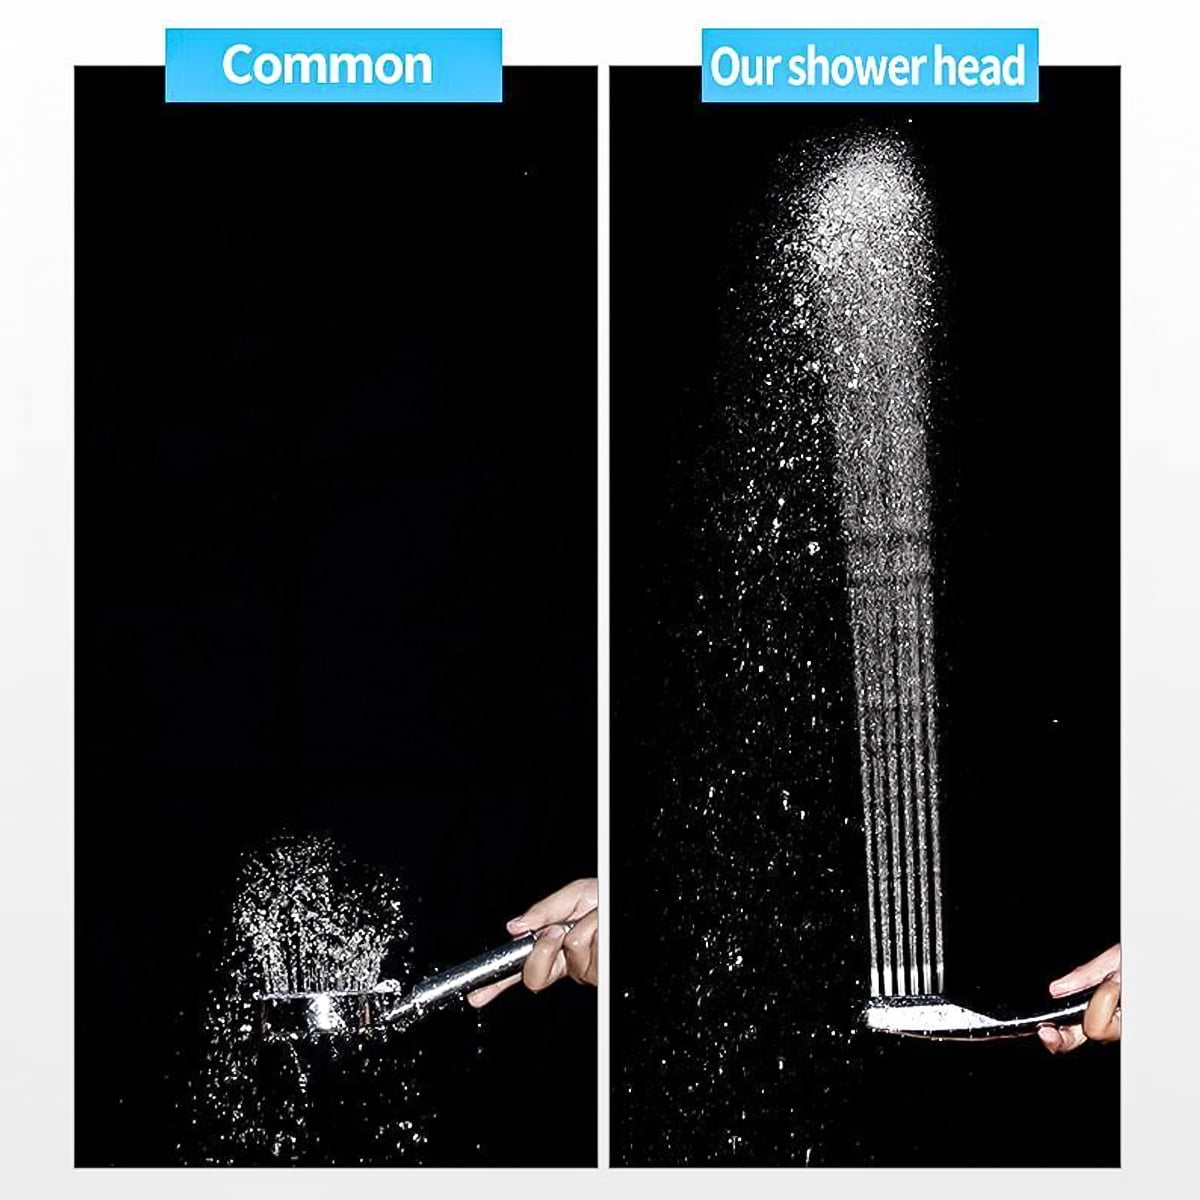 YLLQXI Handheld Shower Head High Pressure Streamline Water Saving Rainfall Bathroom Filtered Spray ABS With Chrome Plated Booster Showerhead 300 Holes 